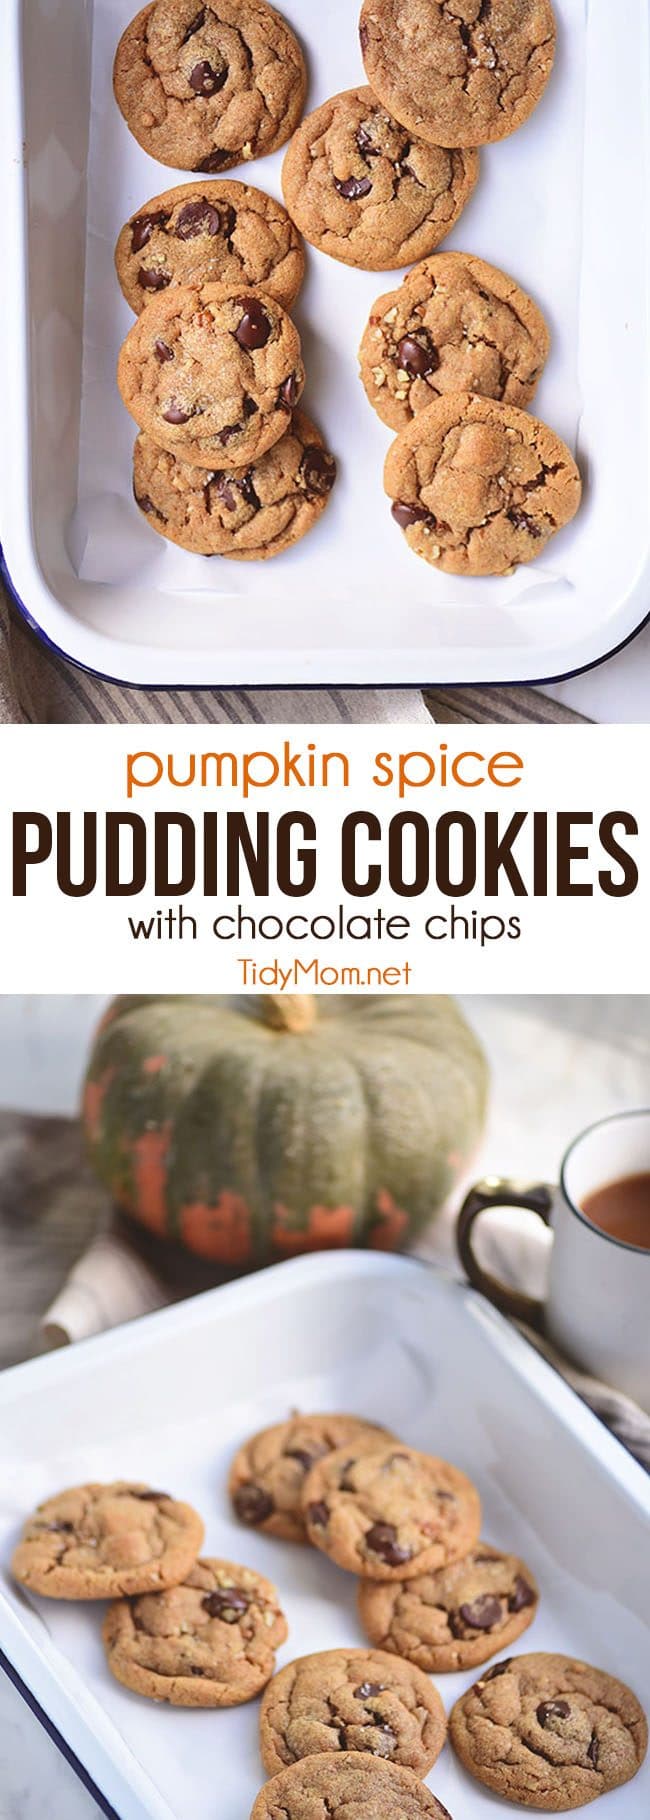 Bring a taste of fall to your chocolate chip cookies thanks to a box of pumpkin pudding mix. These Pumpkin Spice Cookies are soft, delicious and loaded with chocolate chips and pecans. If you haven’t had a pudding cookie, you don’t know what you’re missing. SO GOOD!! Print the full recipe at Tidymom.net